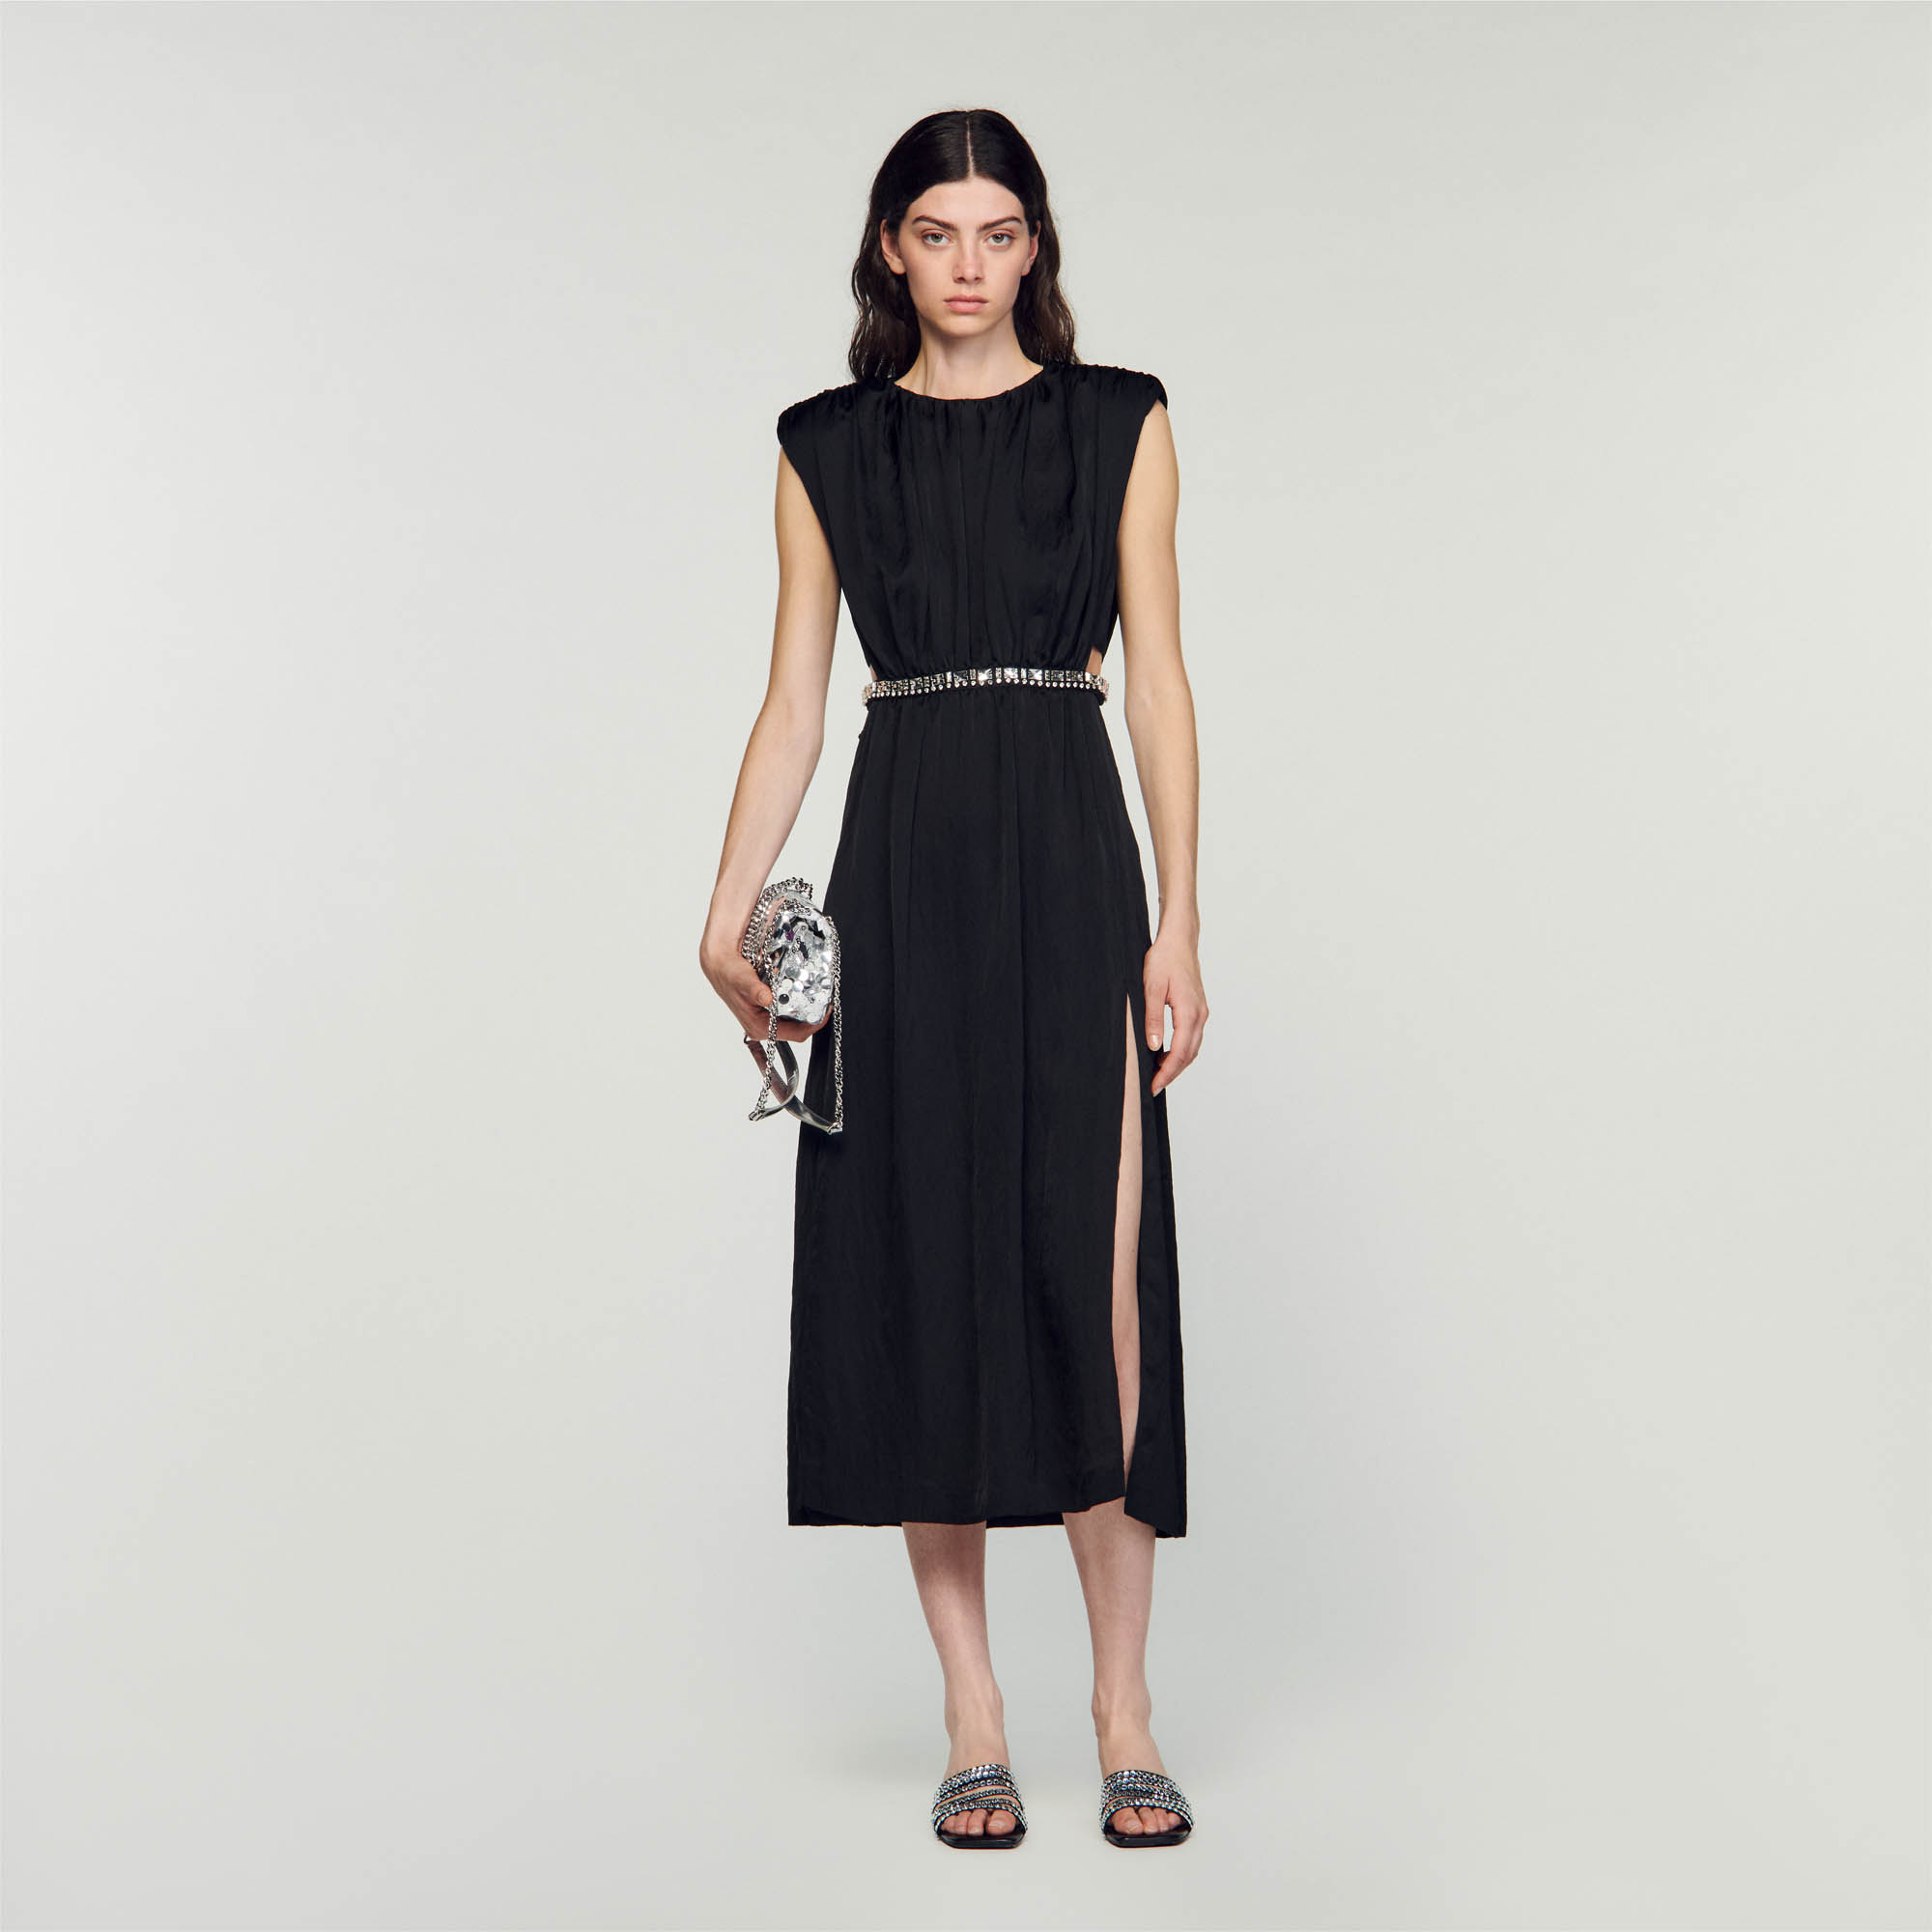 Sandro acetate Sleeveless maxi dress in crinkle-effect fabric featuring a round neck, structured shoulders, a cutaway on the waist embellished with a jewelry-style trim and a slit at the side